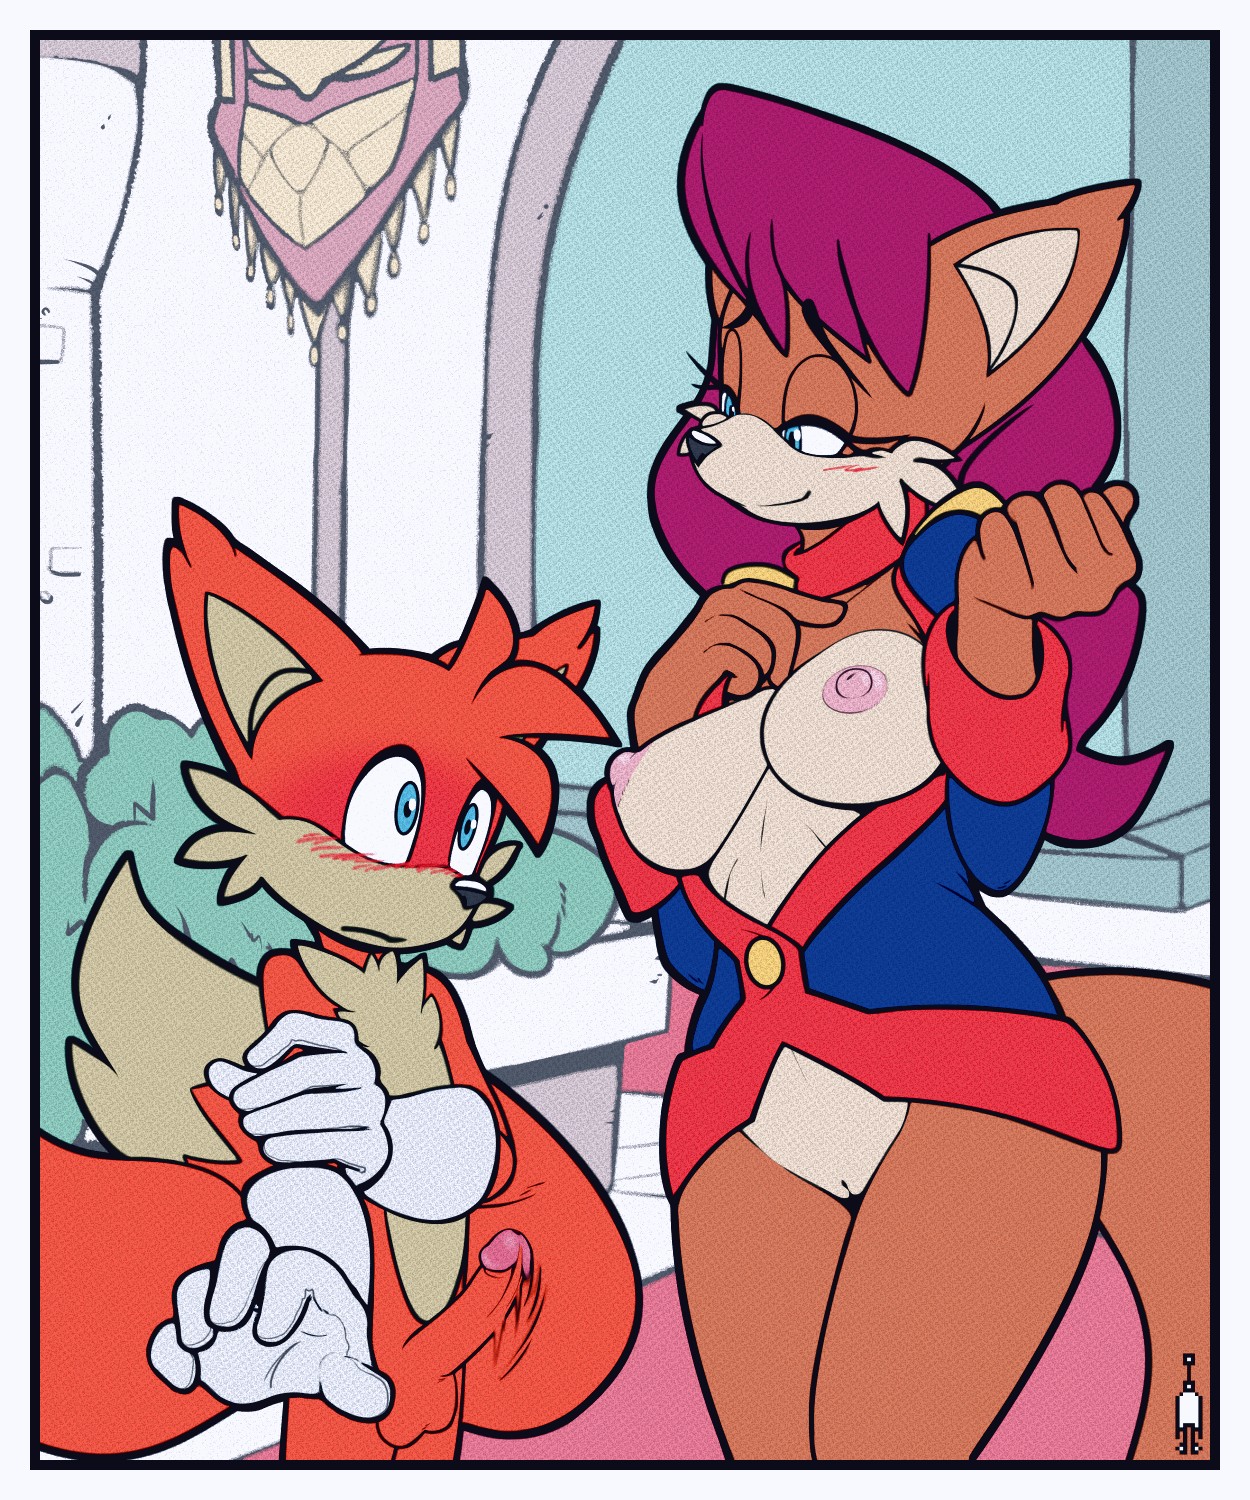 Mother Knows Best porn comic page 01 on category Sonic The Hedgehog